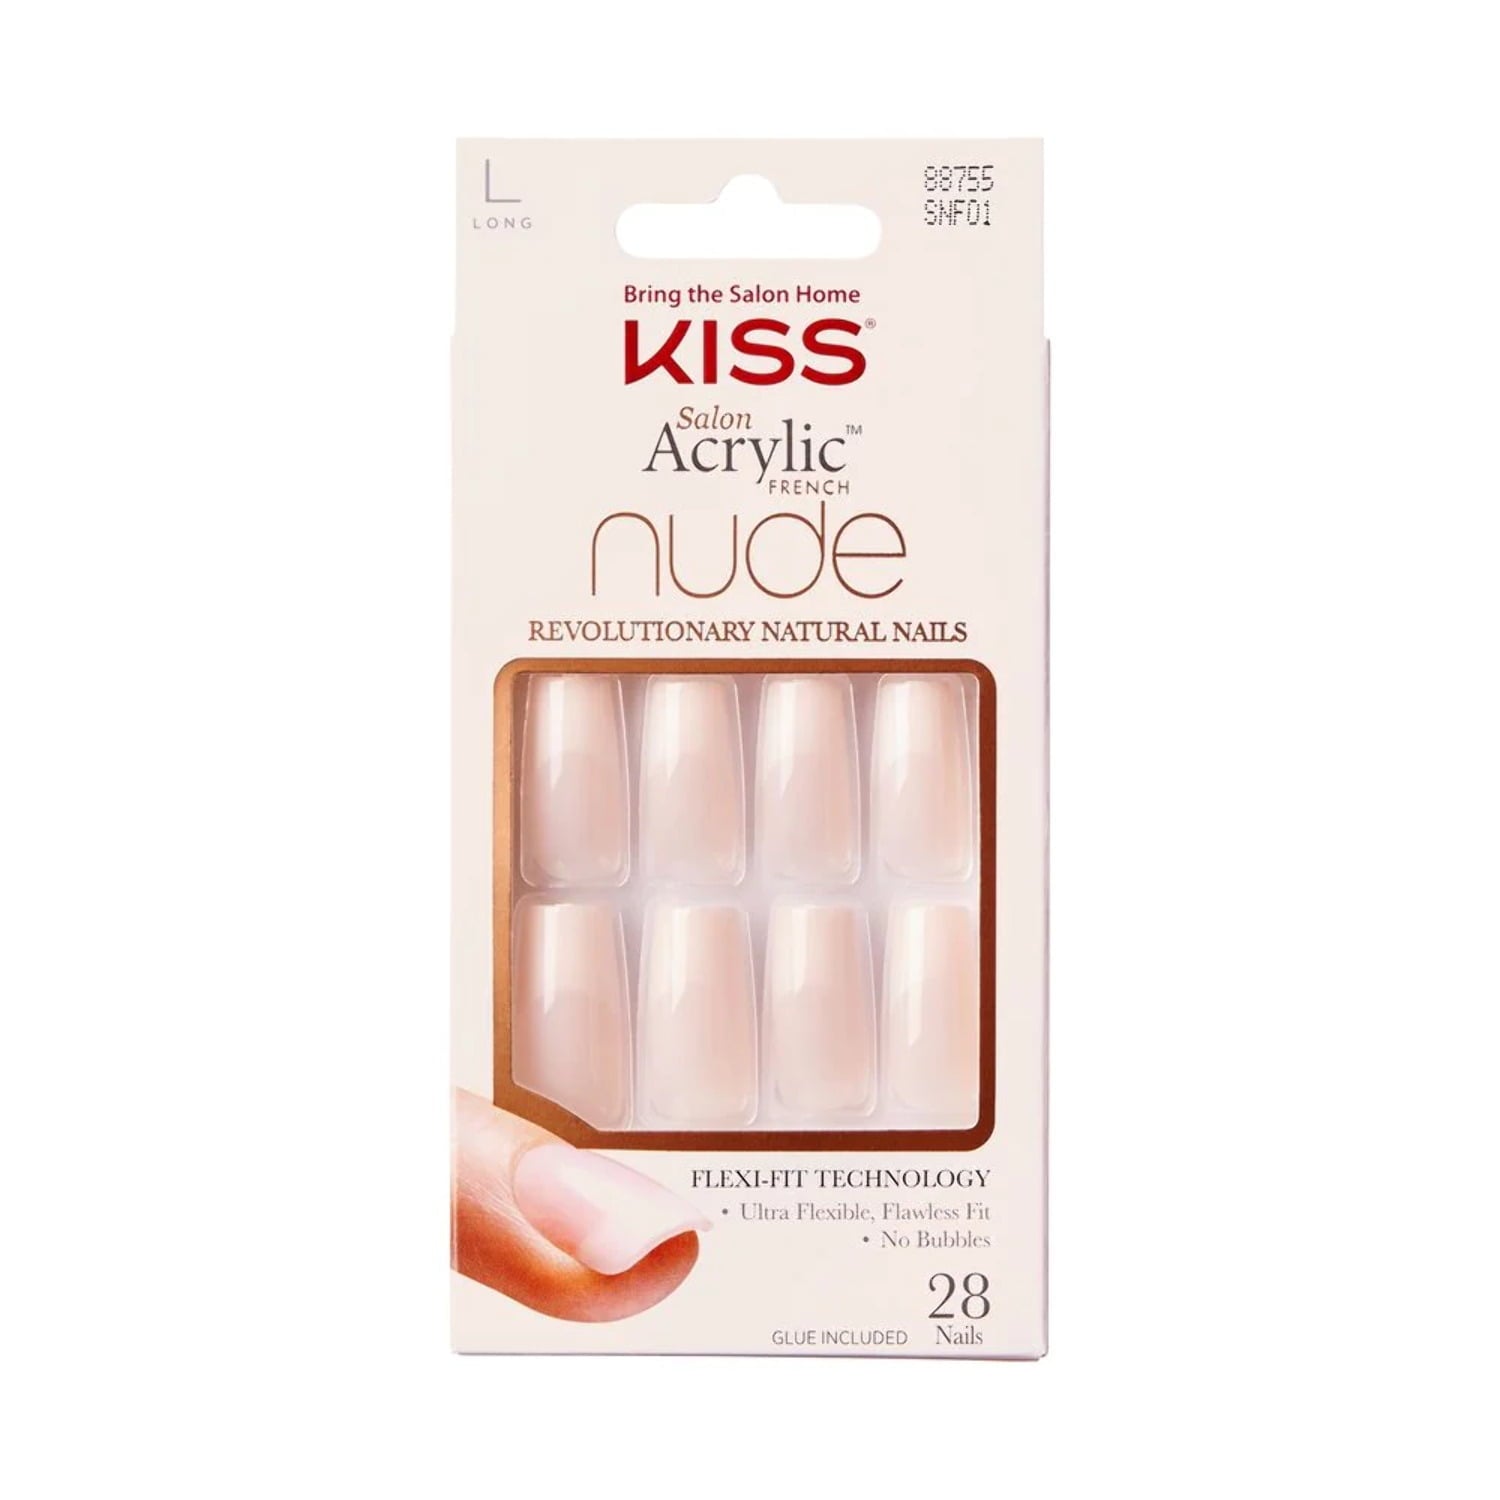 Kiss Salon Acrylic French Nude Nails - Reveal It, 0.07 Oz (SNF01)